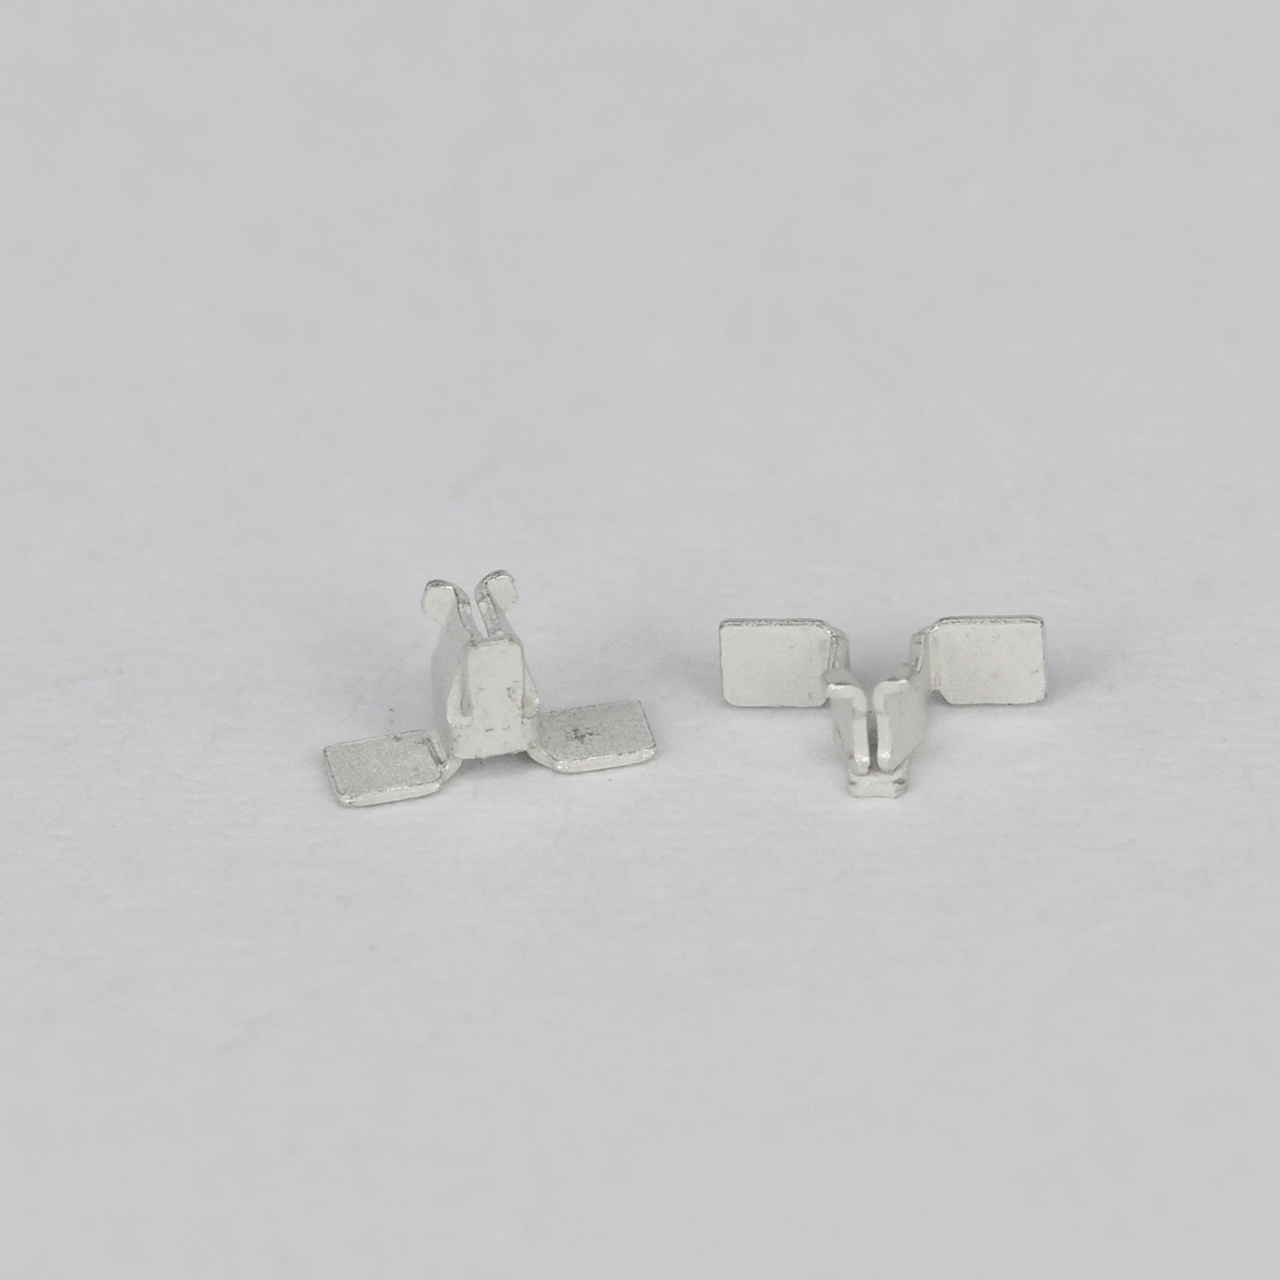 J0014 Top Entry wire connector